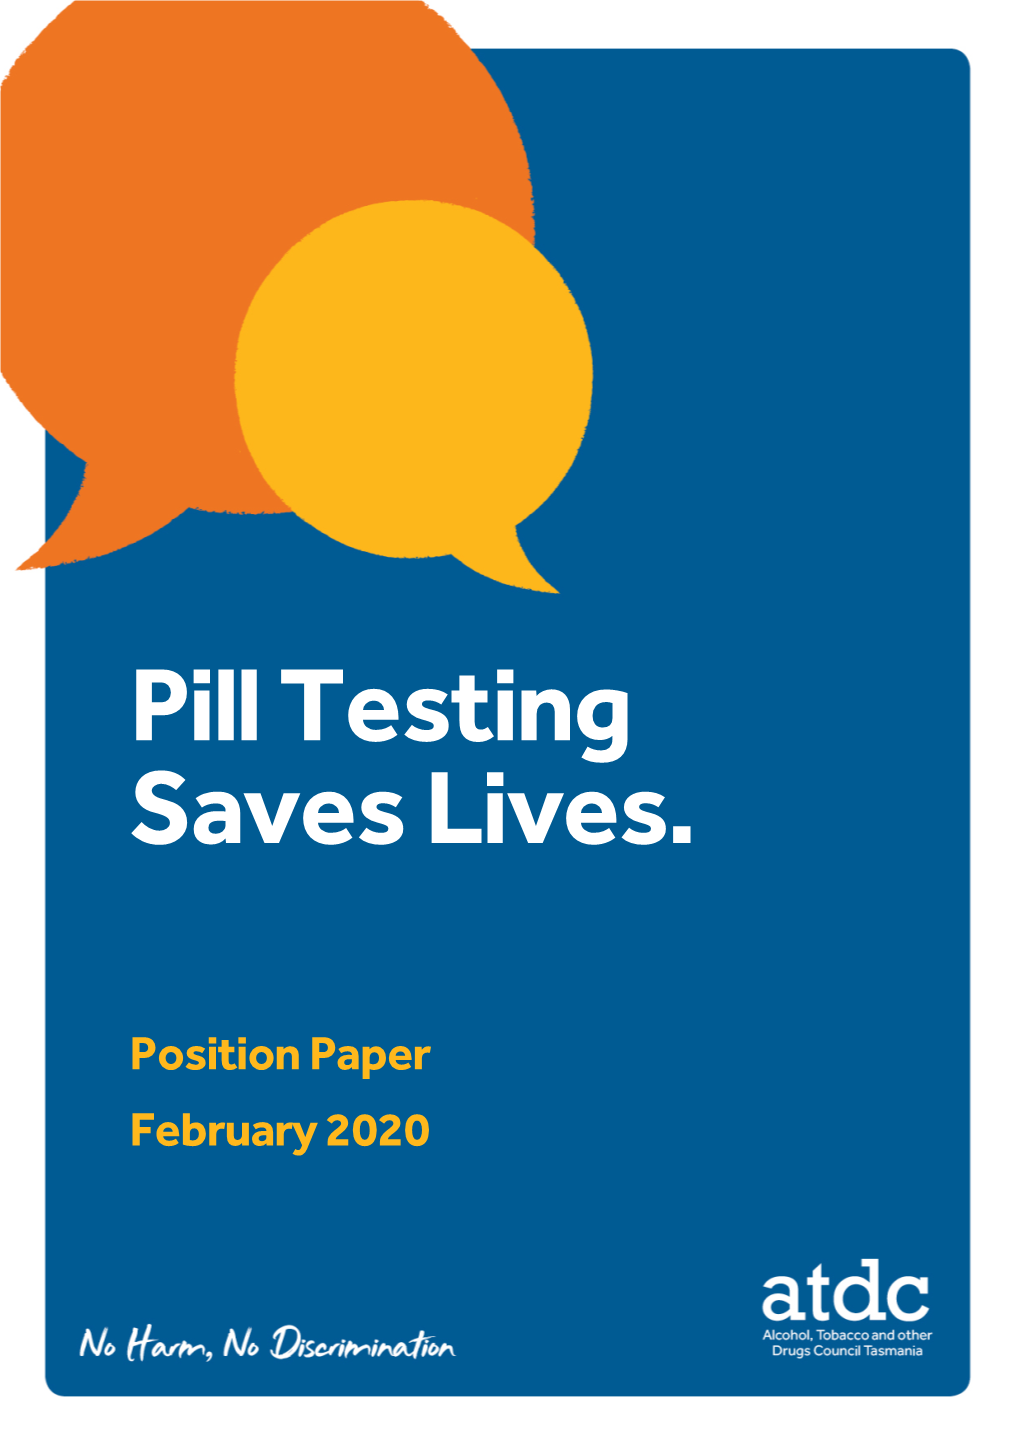 Pill Testing Position Paper February 2020